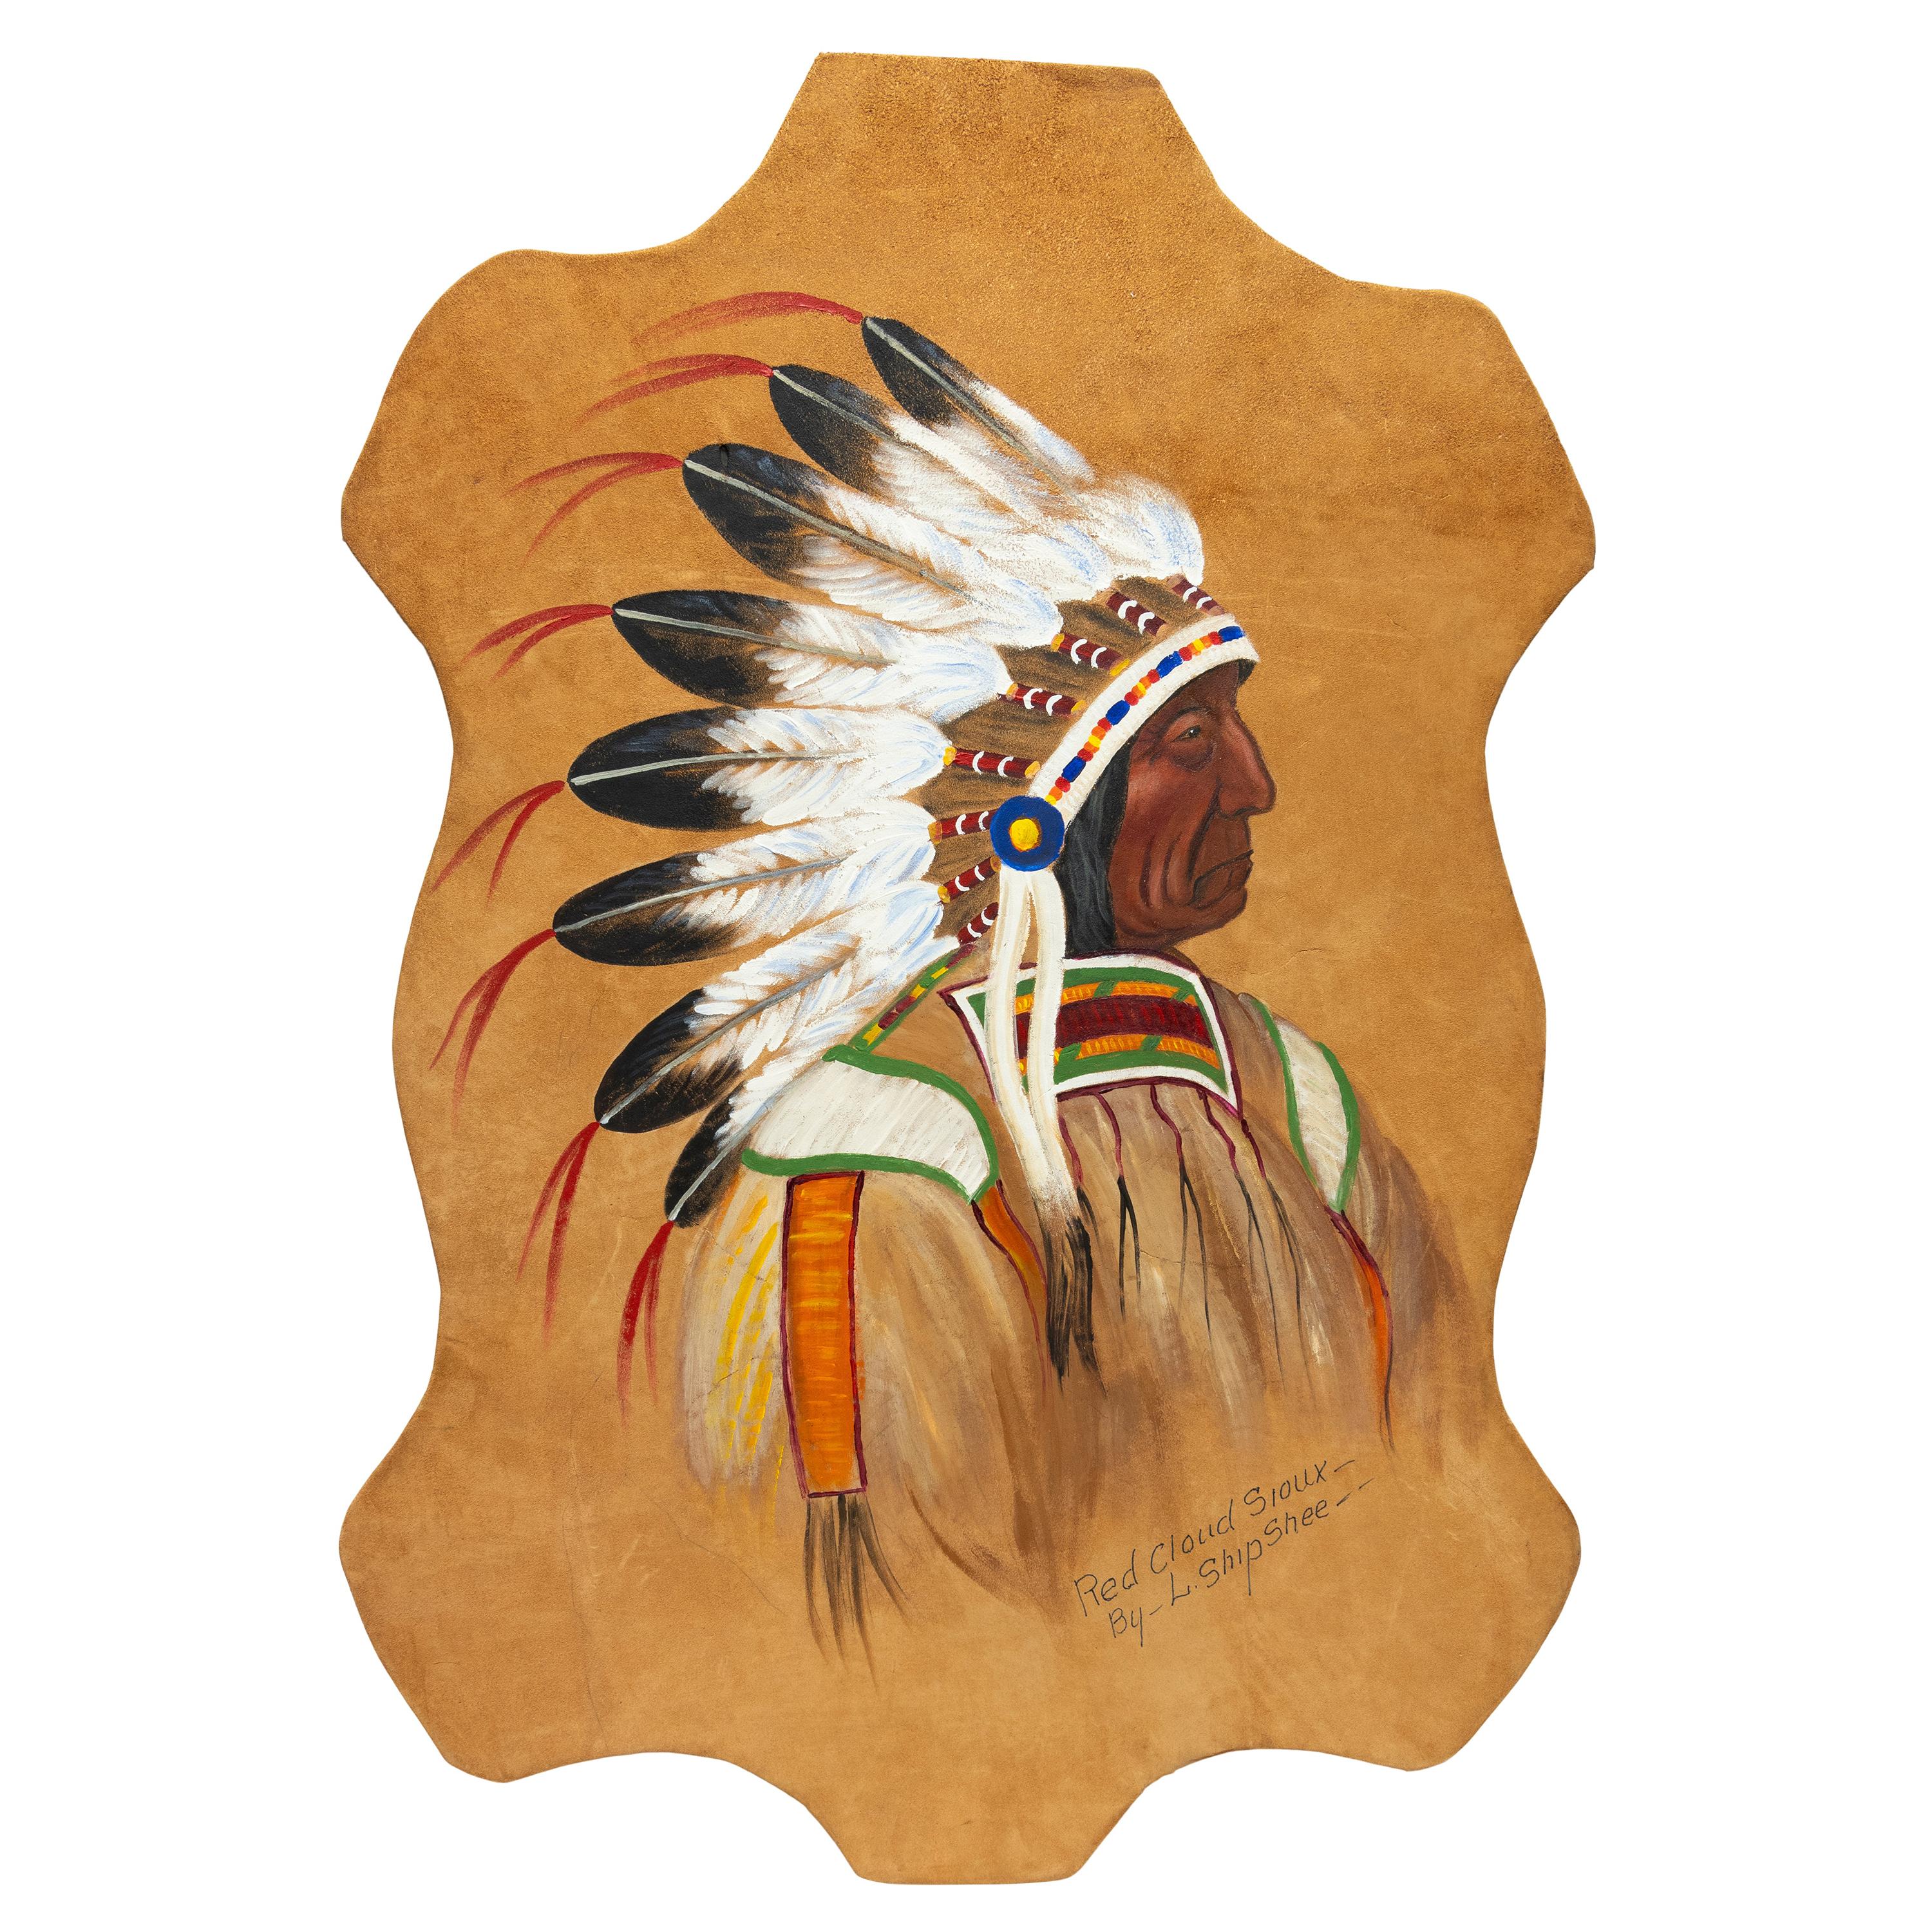 Hide Painting of Chief Red Cloud by Louis Shipshee